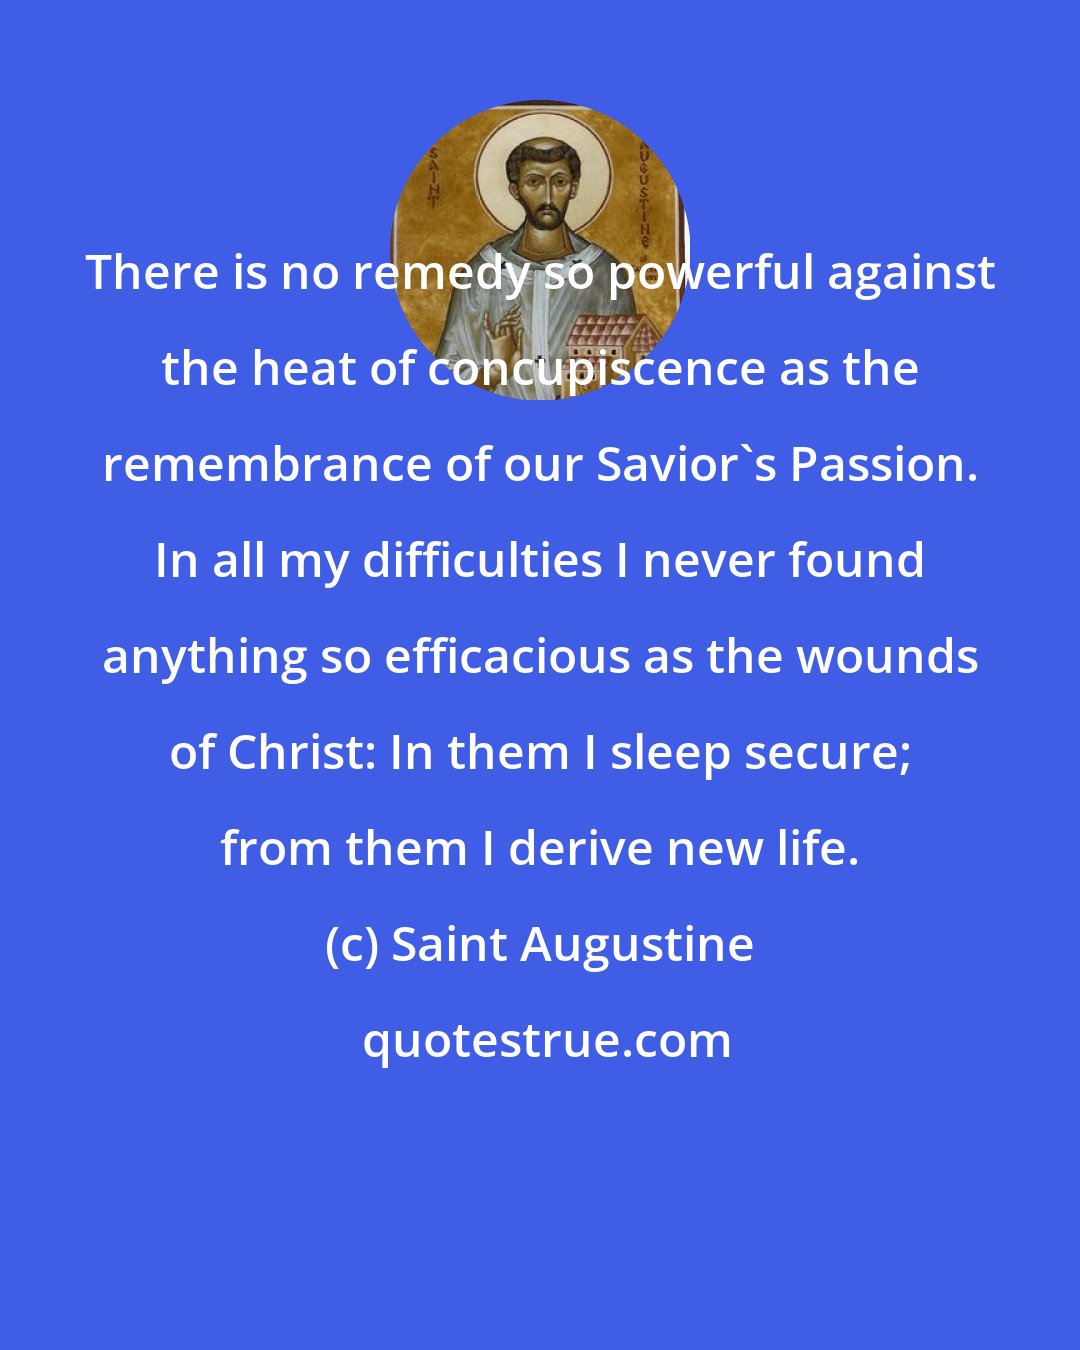 Saint Augustine: There is no remedy so powerful against the heat of concupiscence as the remembrance of our Savior's Passion. In all my difficulties I never found anything so efficacious as the wounds of Christ: In them I sleep secure; from them I derive new life.